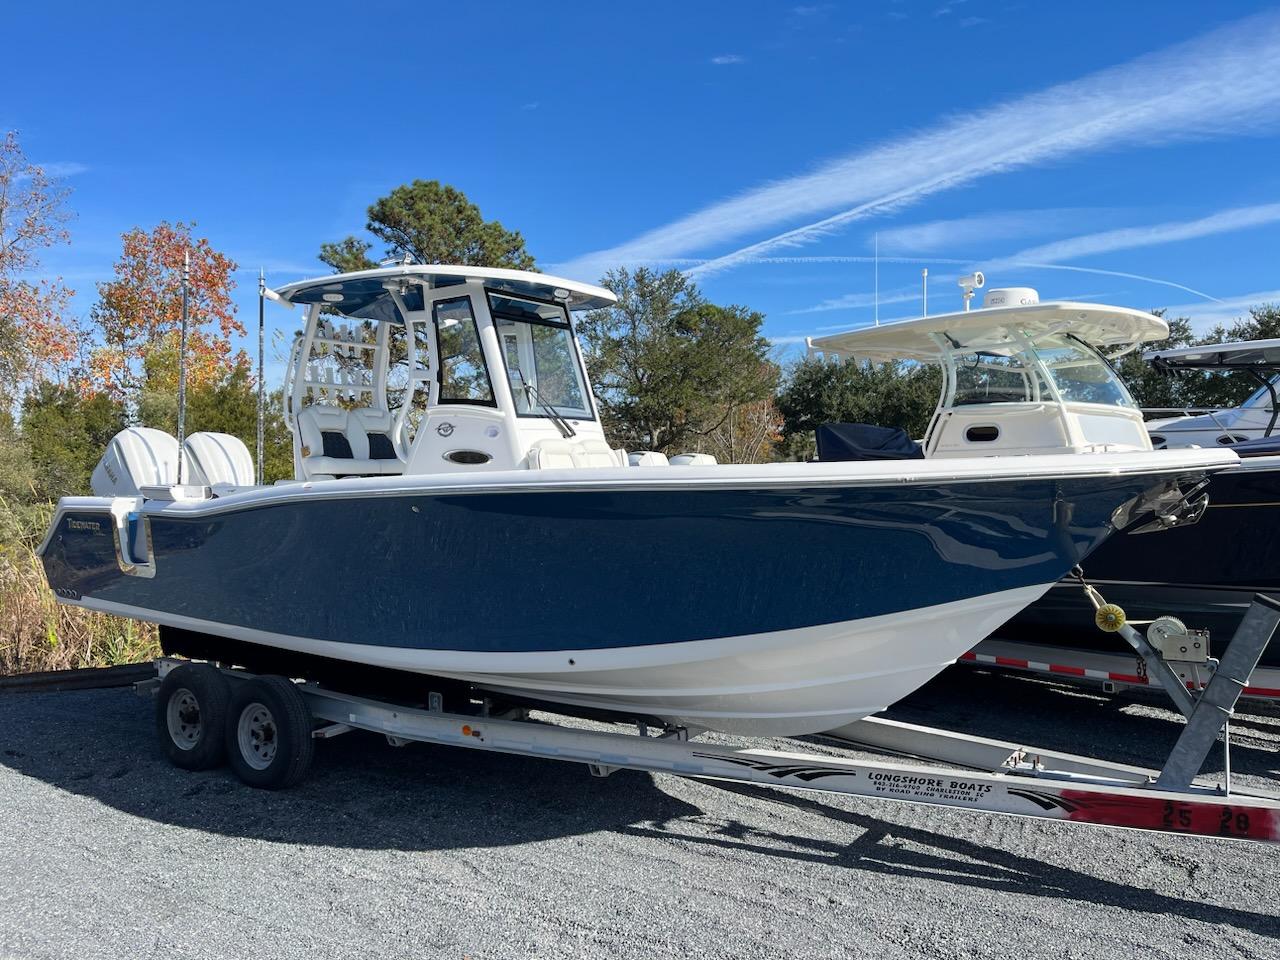 Tidewater boats for sale - Boat Trader